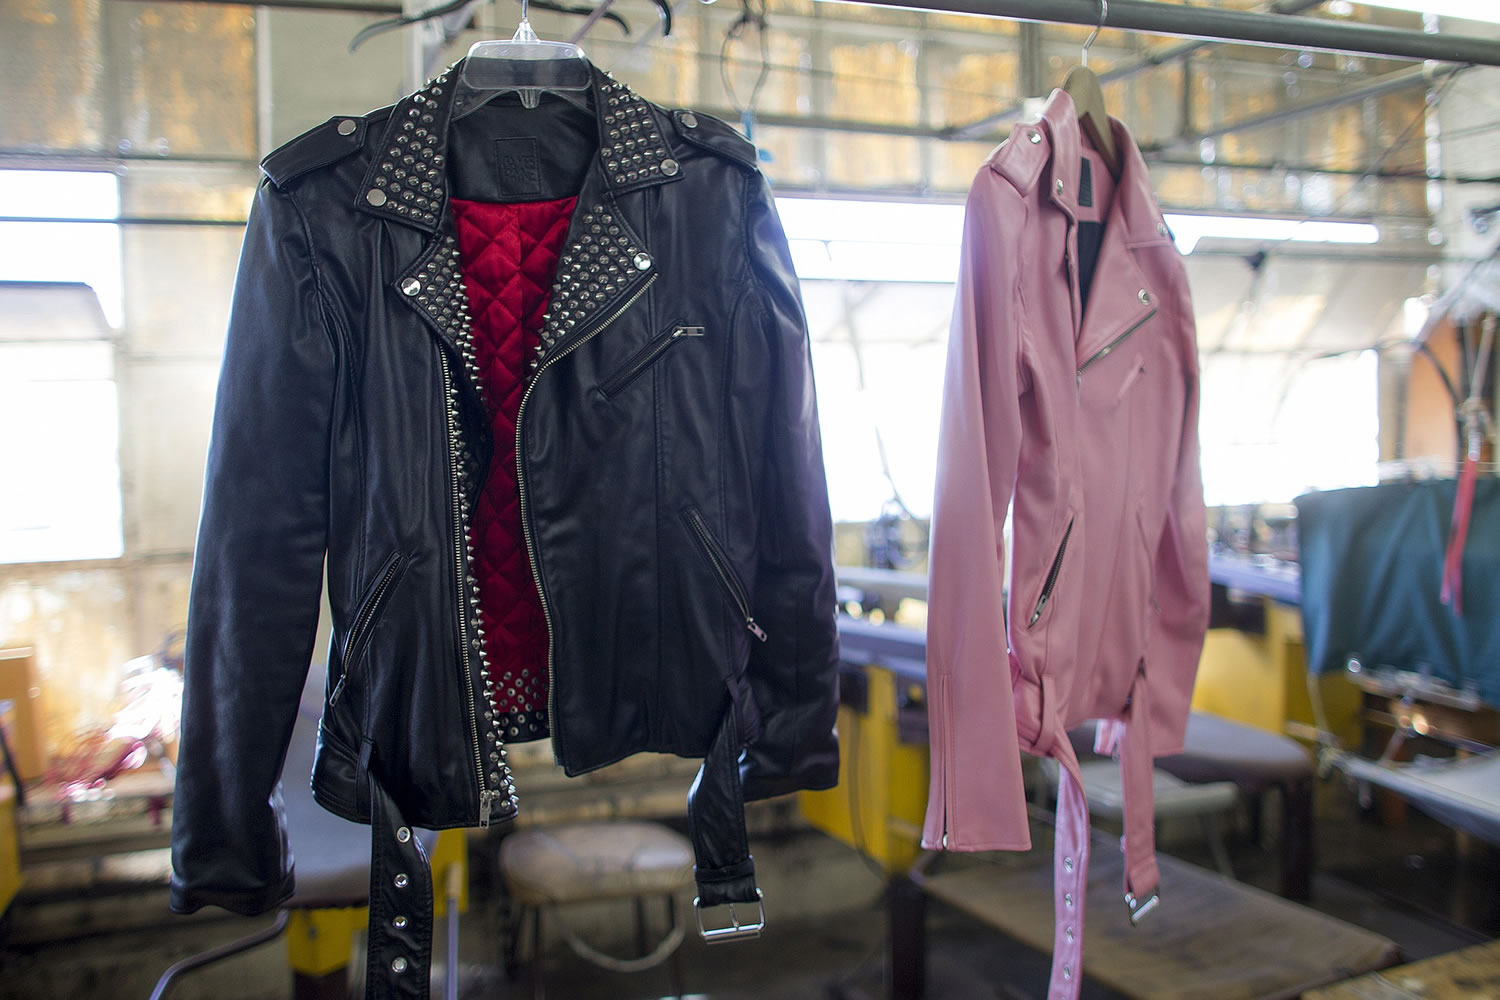 Sarah and Mikey Brannon's fashion house features a line of vegan fashion that includes high-end faux leather jackets.